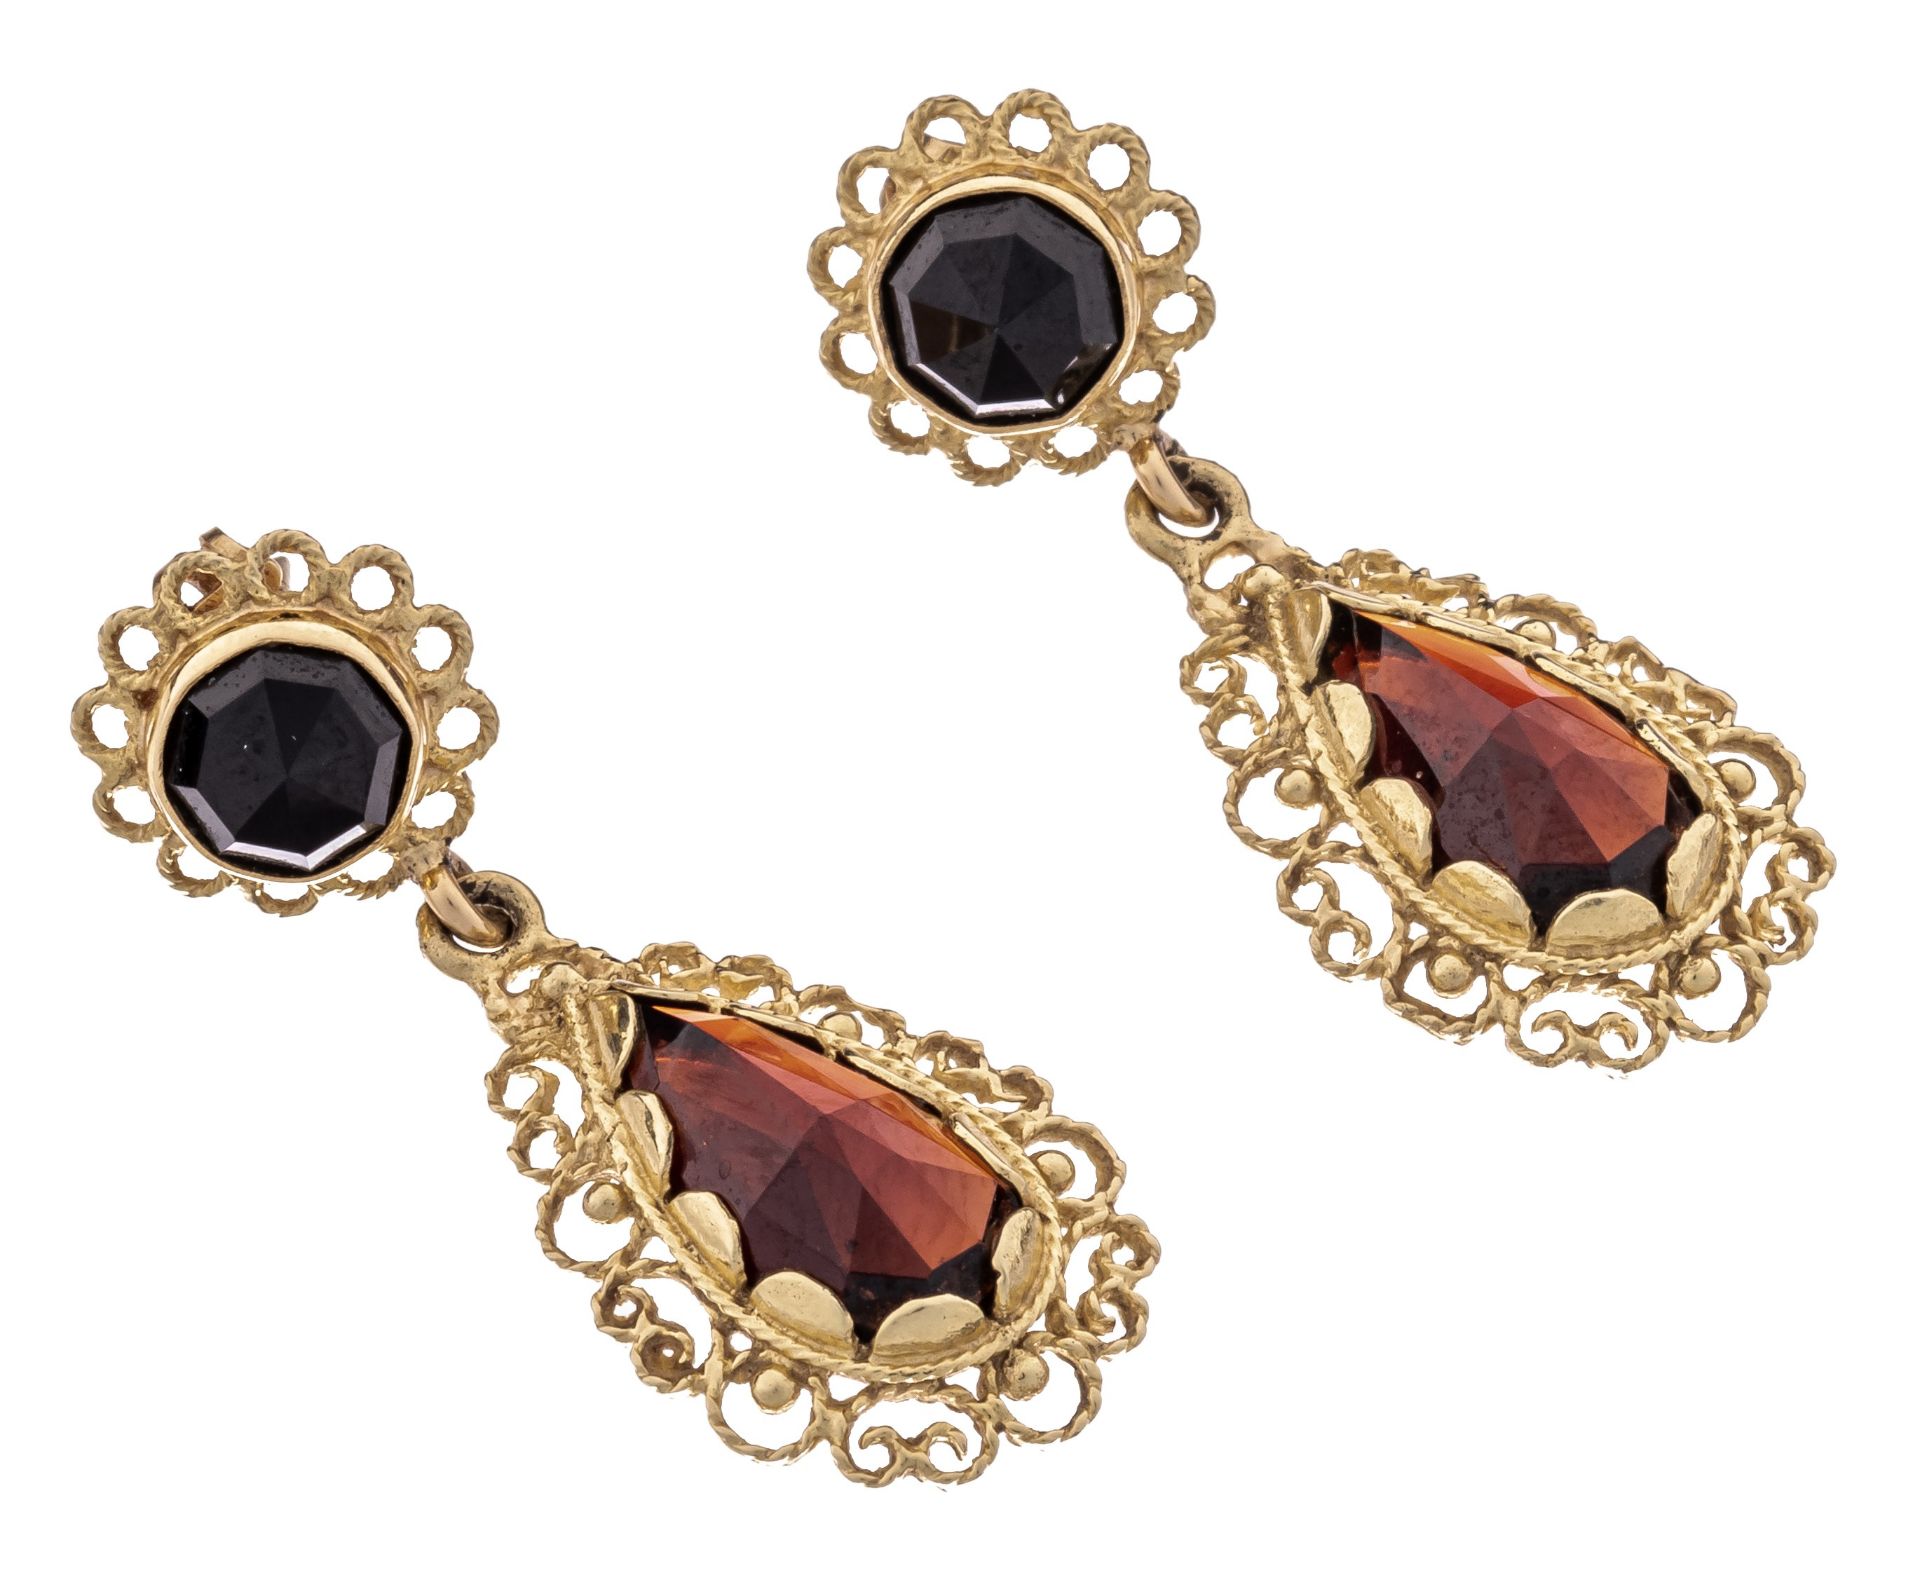 A pair of 18ct yellow gold drop earrings, set with garnets, H 3,5 cm - 7,2 g - Image 2 of 3